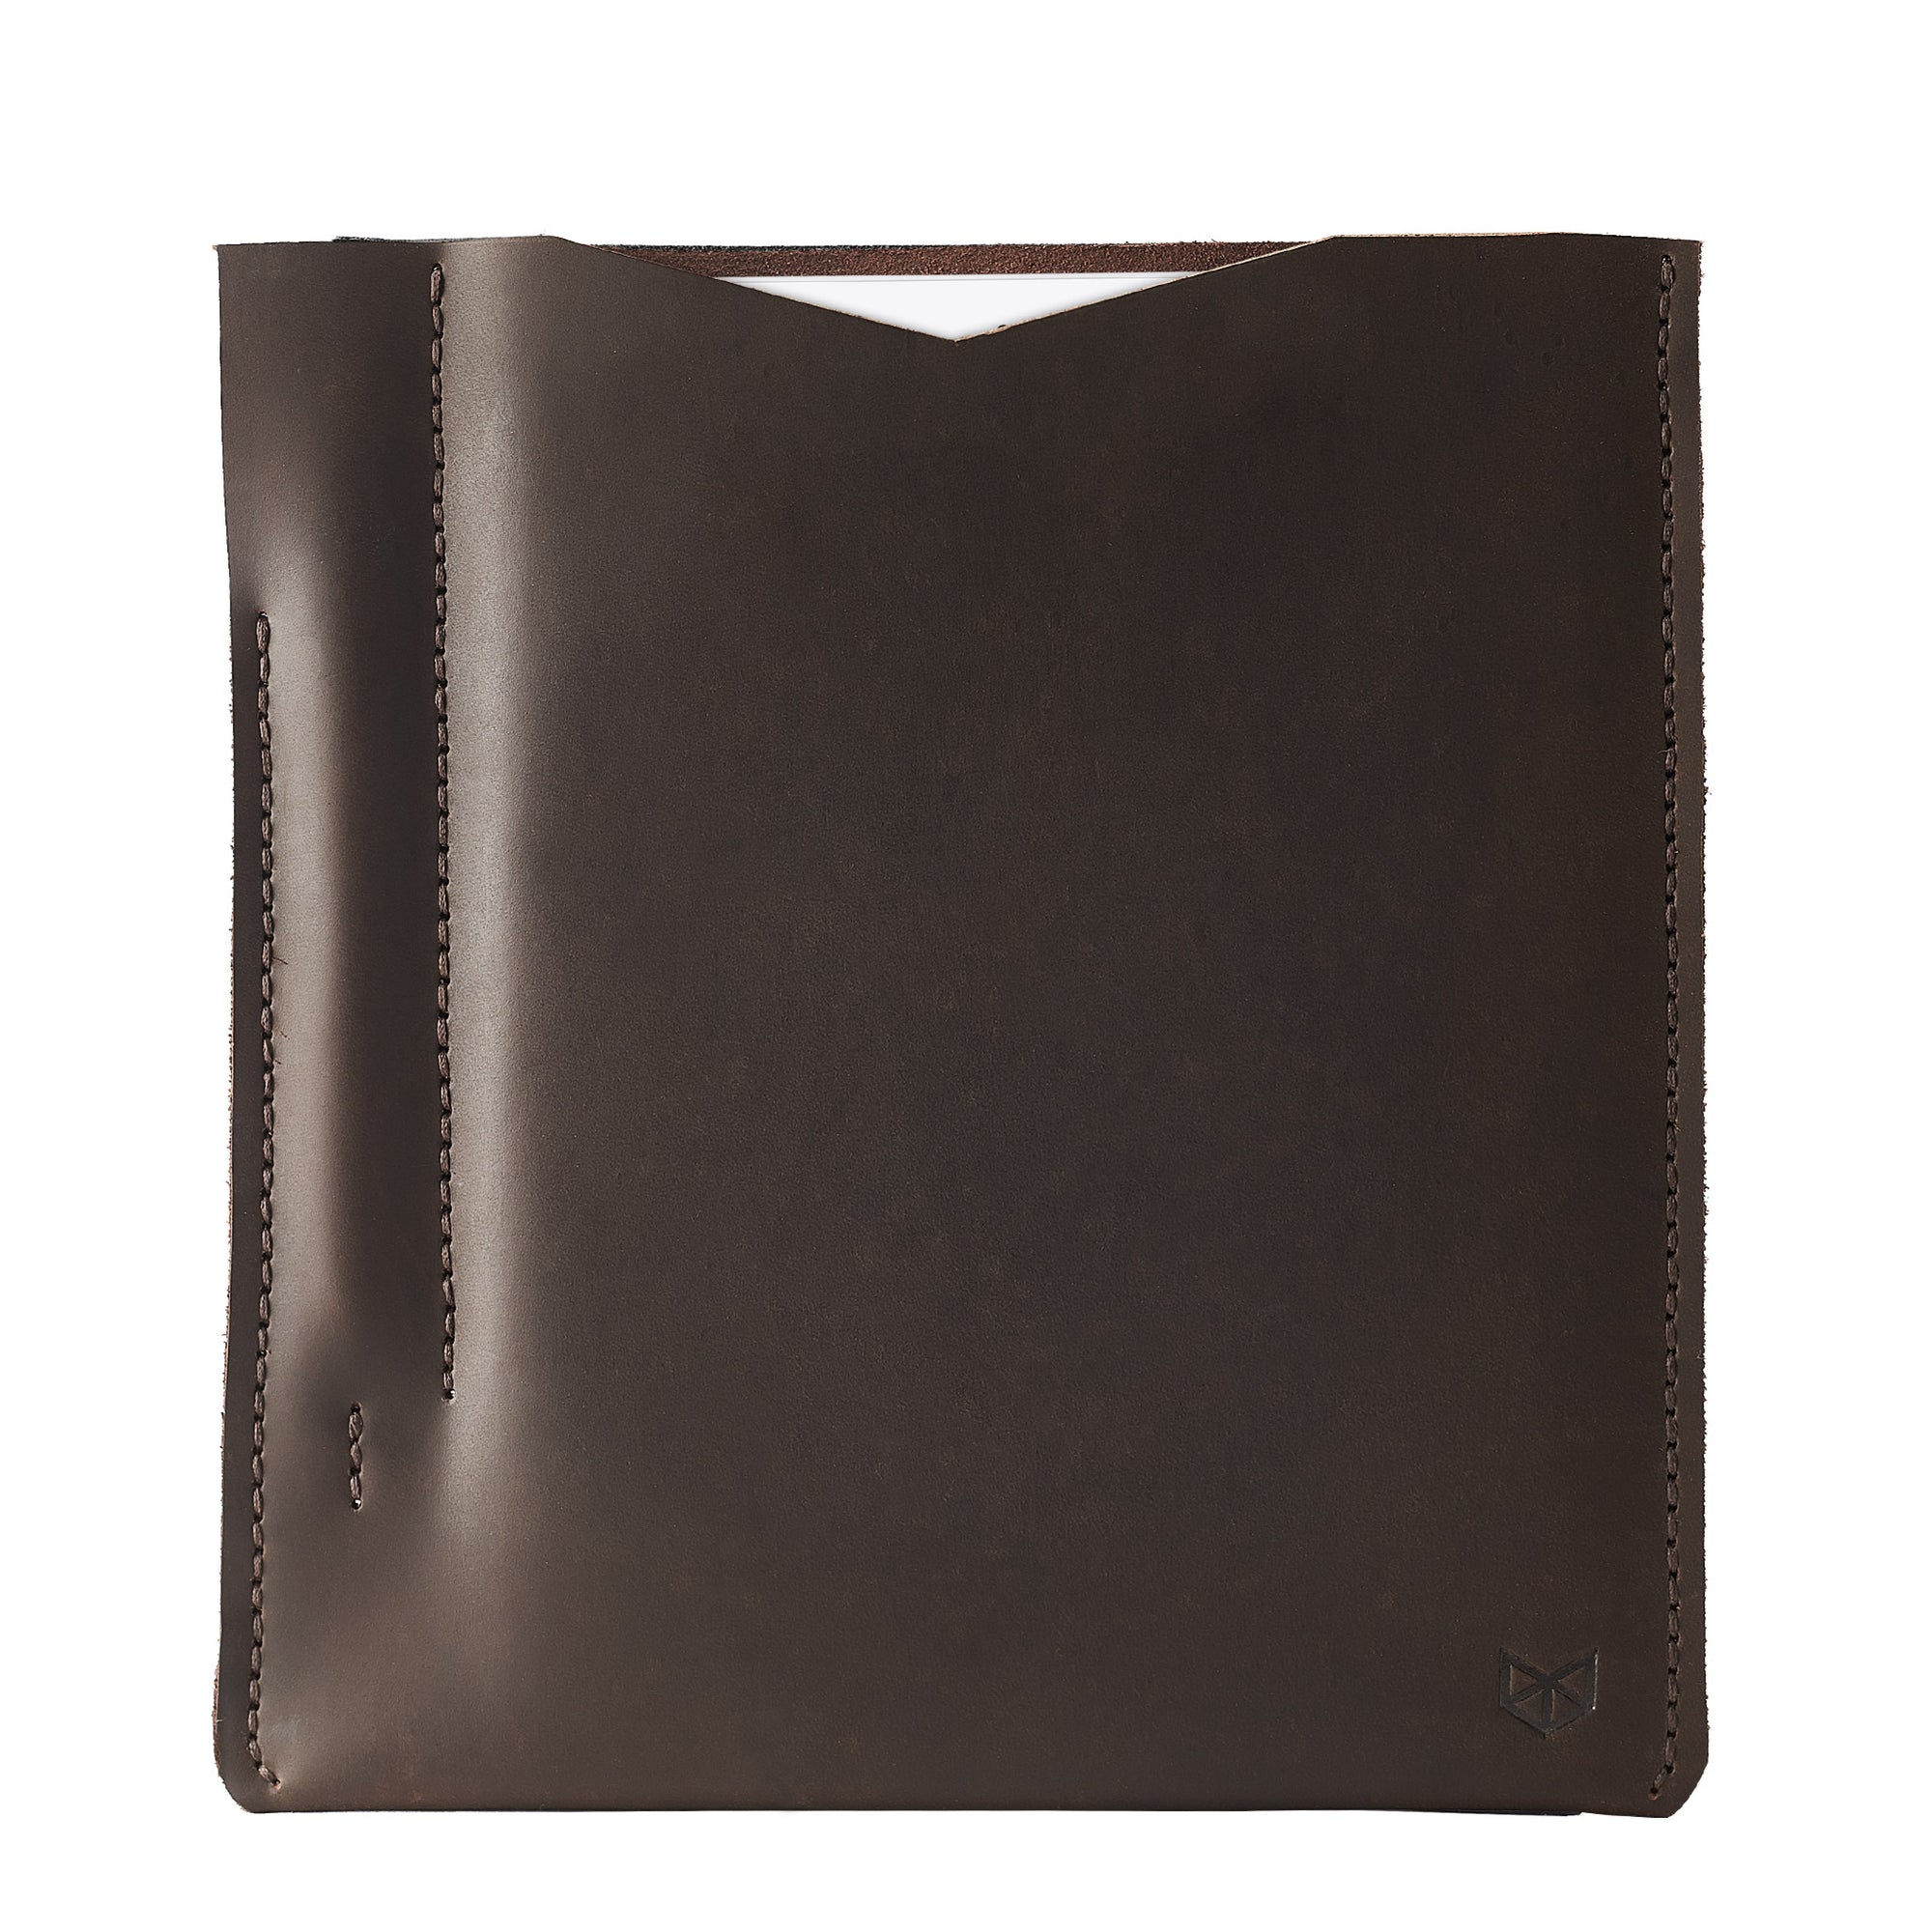 Marron leather sleeve for iPad pro 10.5 inch 12.9 inch. Mens gifts